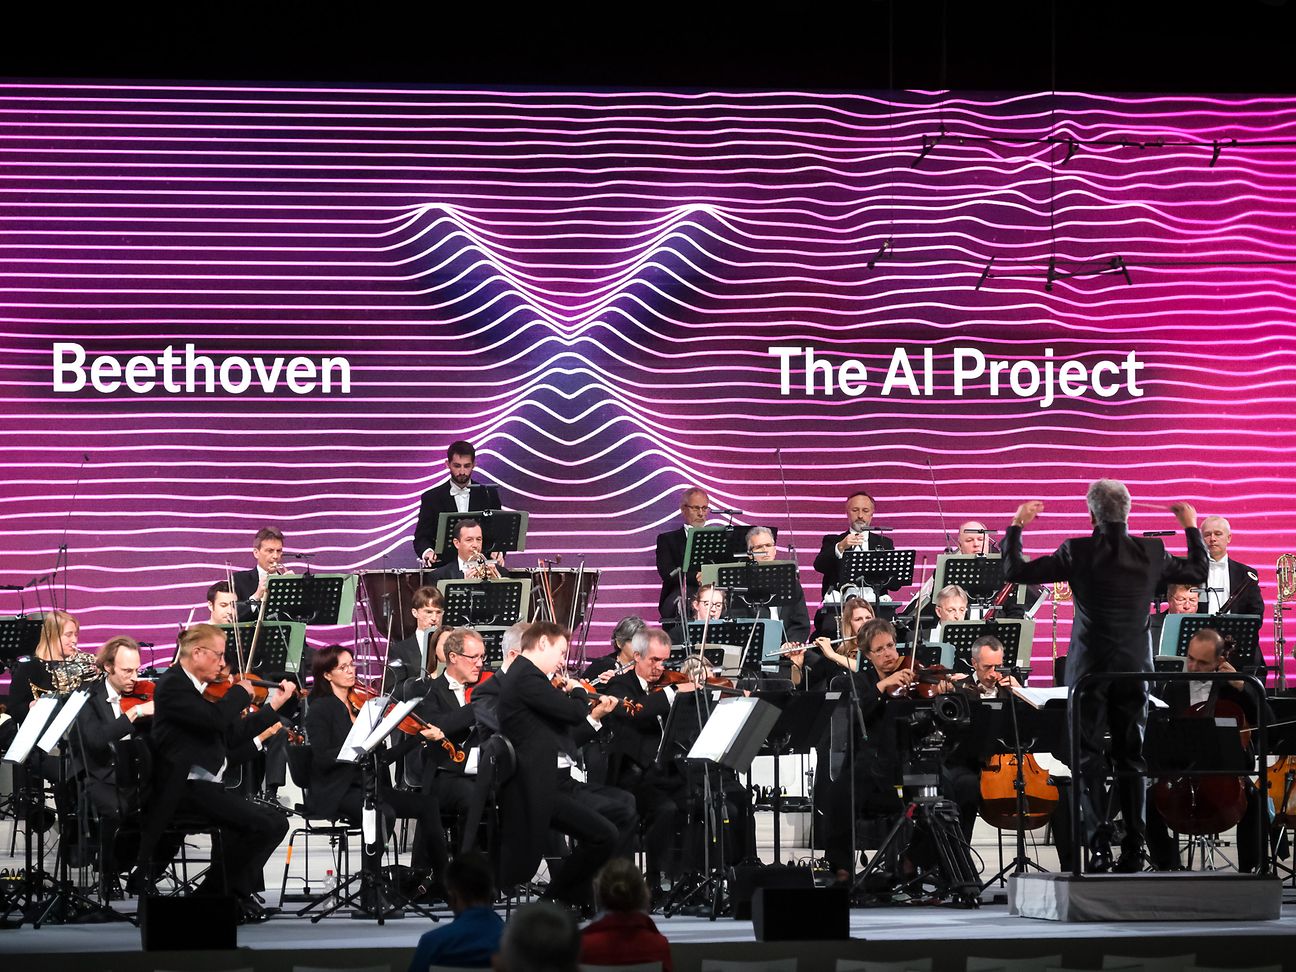 Beethoven X The AI Project